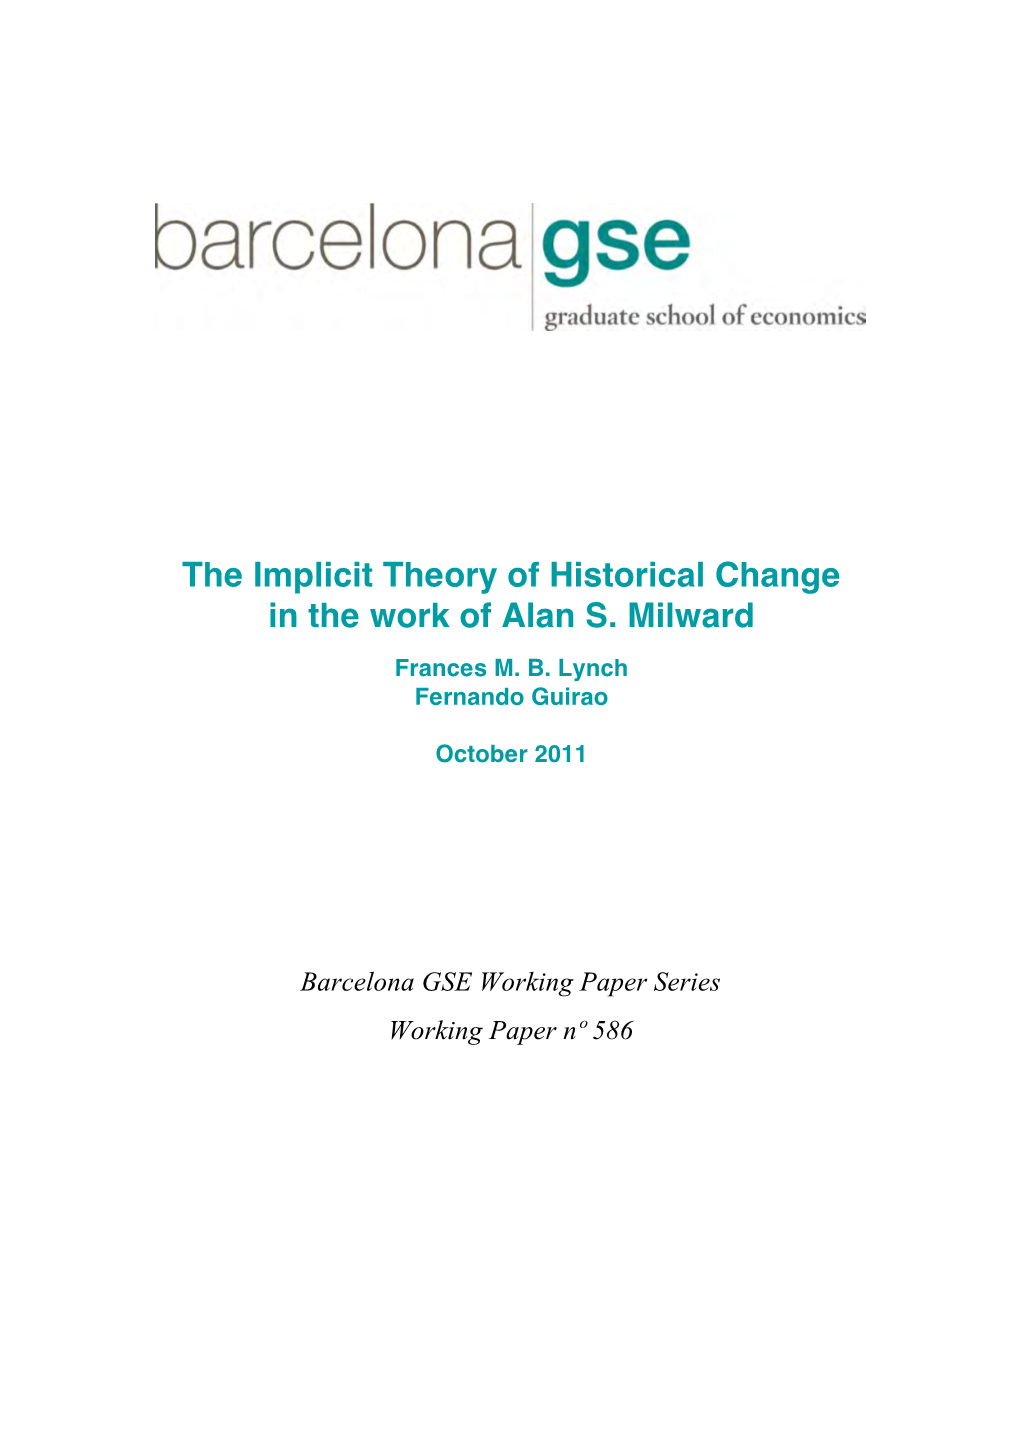 The Implicit Theory of Historical Change in the Work of Alan S. Milward Frances M